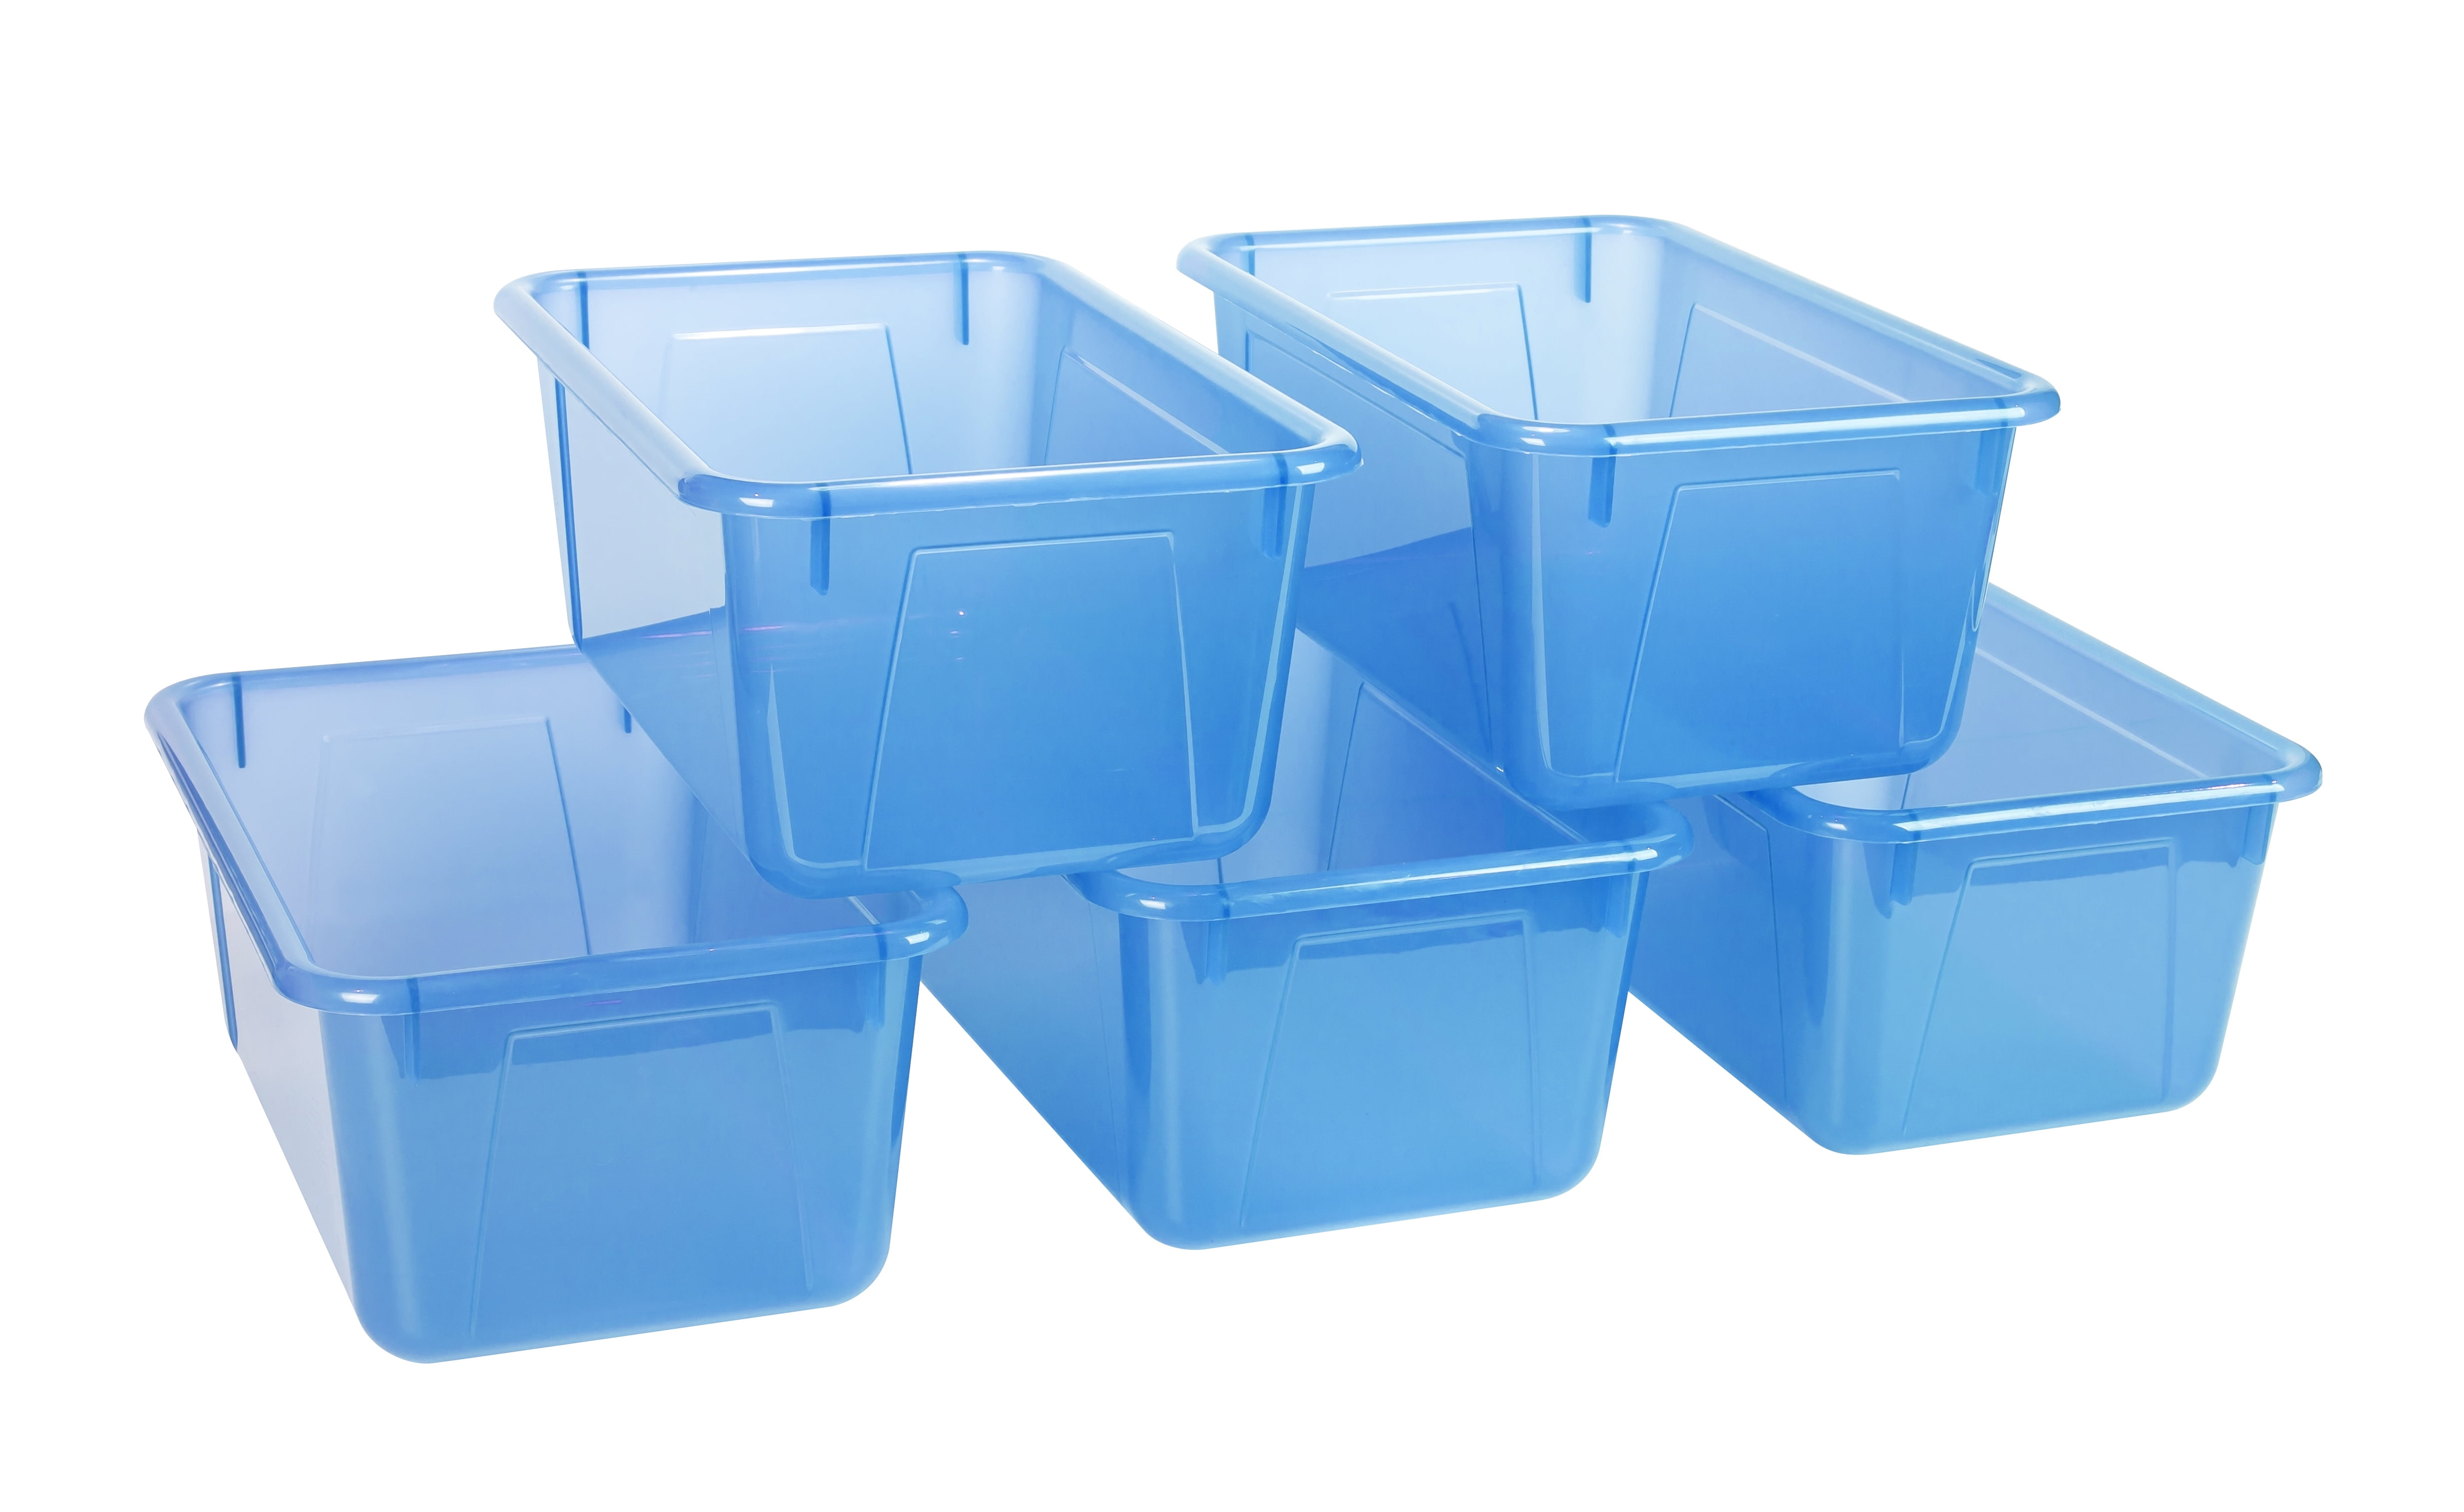 Pen+Gear Plastic Small Cubby Bin, Craft and Hobby Storage, Tint Blue, 5-Pack